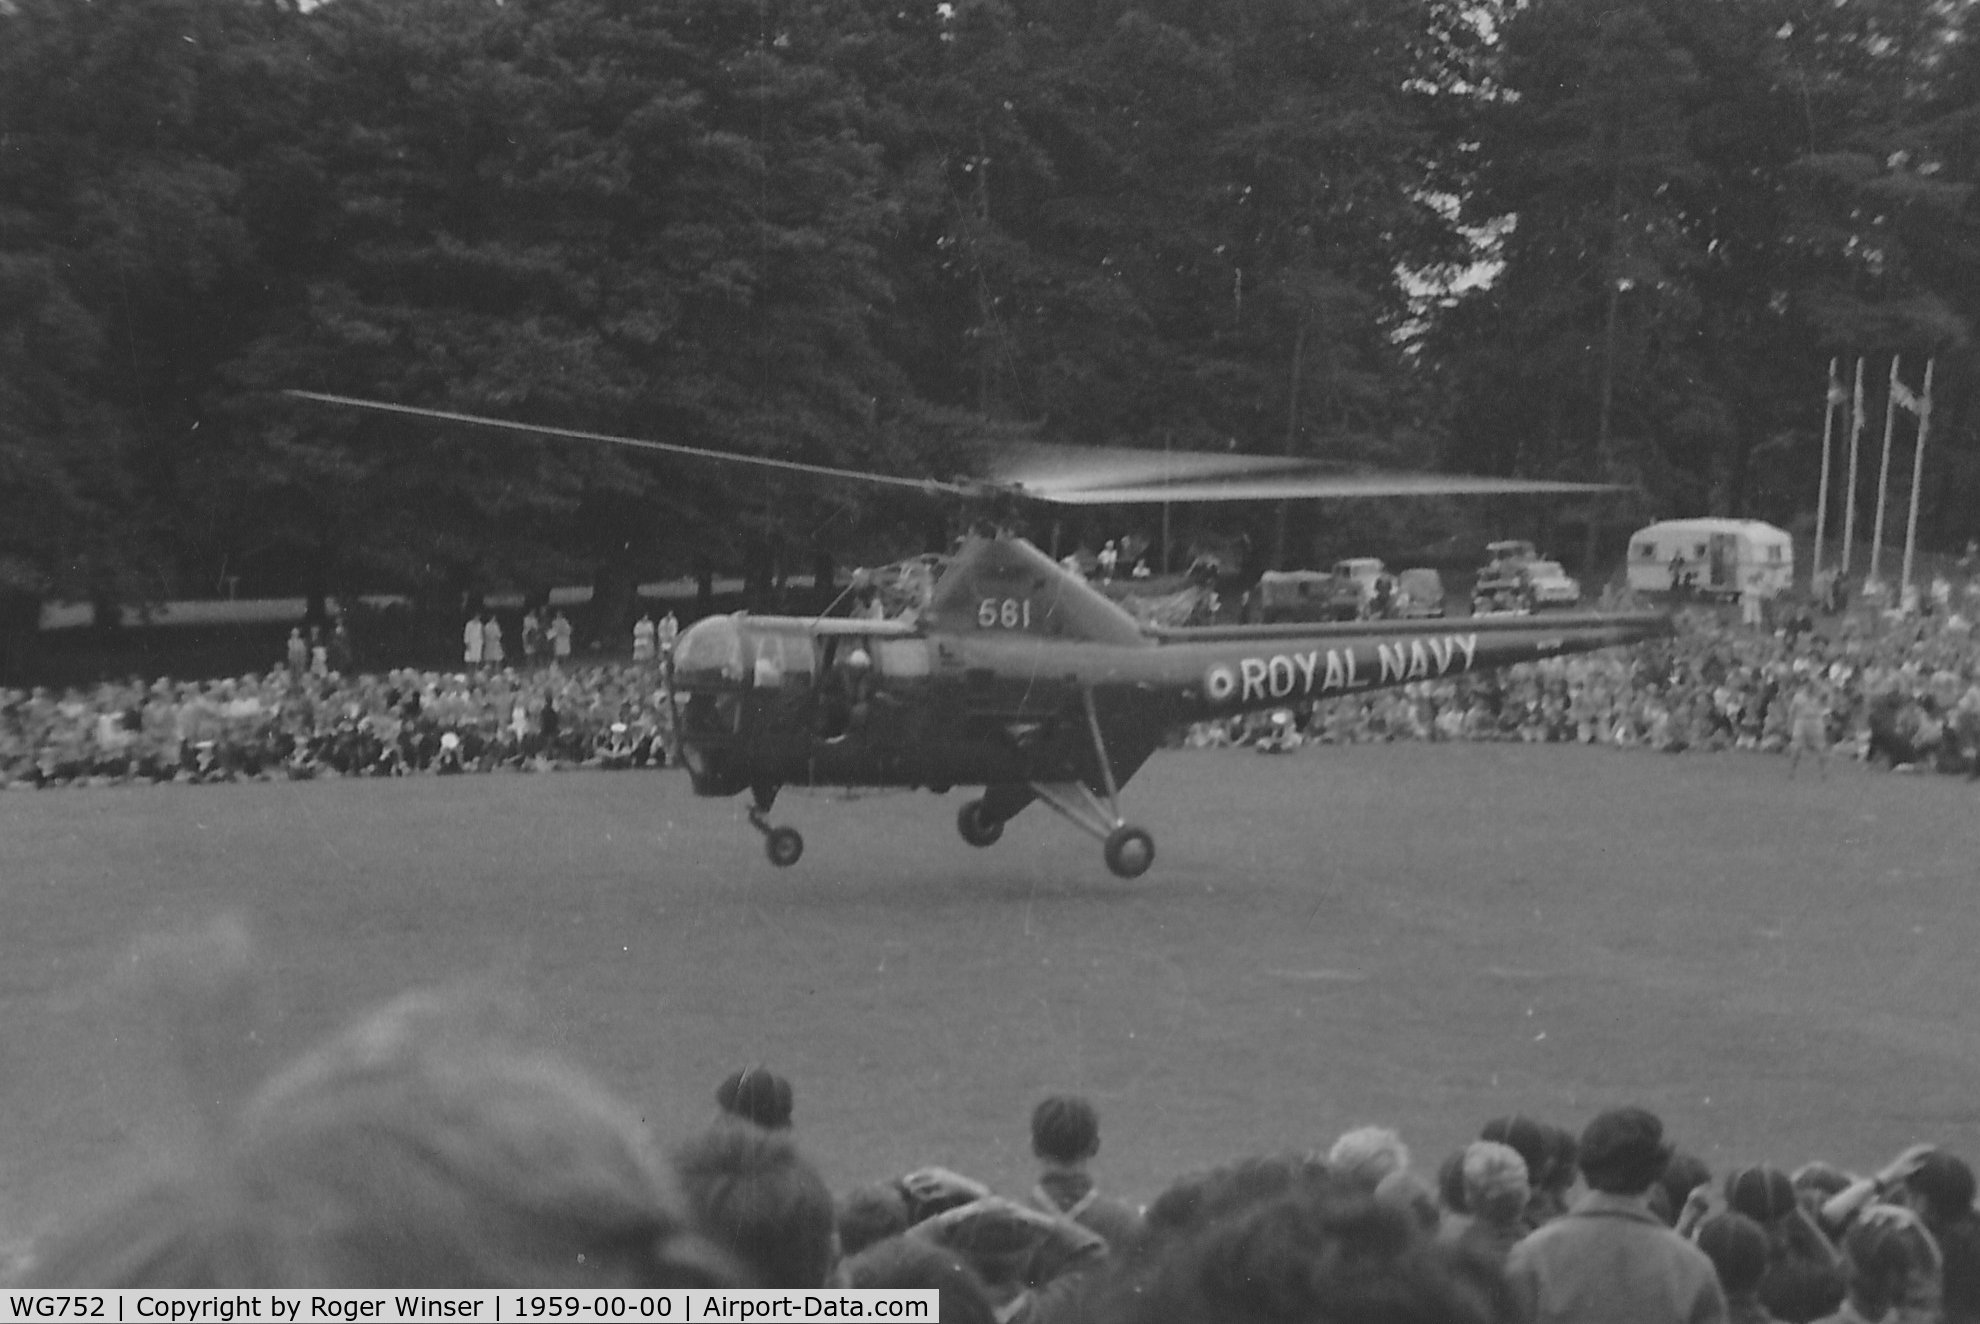 WG752, Westland Dragonfly HR.5 C/N WA/H/62, Off airport. Fleet Air Arm Dragonfly HR.3 helicopter coded 561 of 727 NAS's ASR Flight  based at RNAS Brawdy (HMS Goldcrest), Pembrokeshire seen during a rescue demonstration in Singleton Park, Swansea, Wales, UK circa 1959.